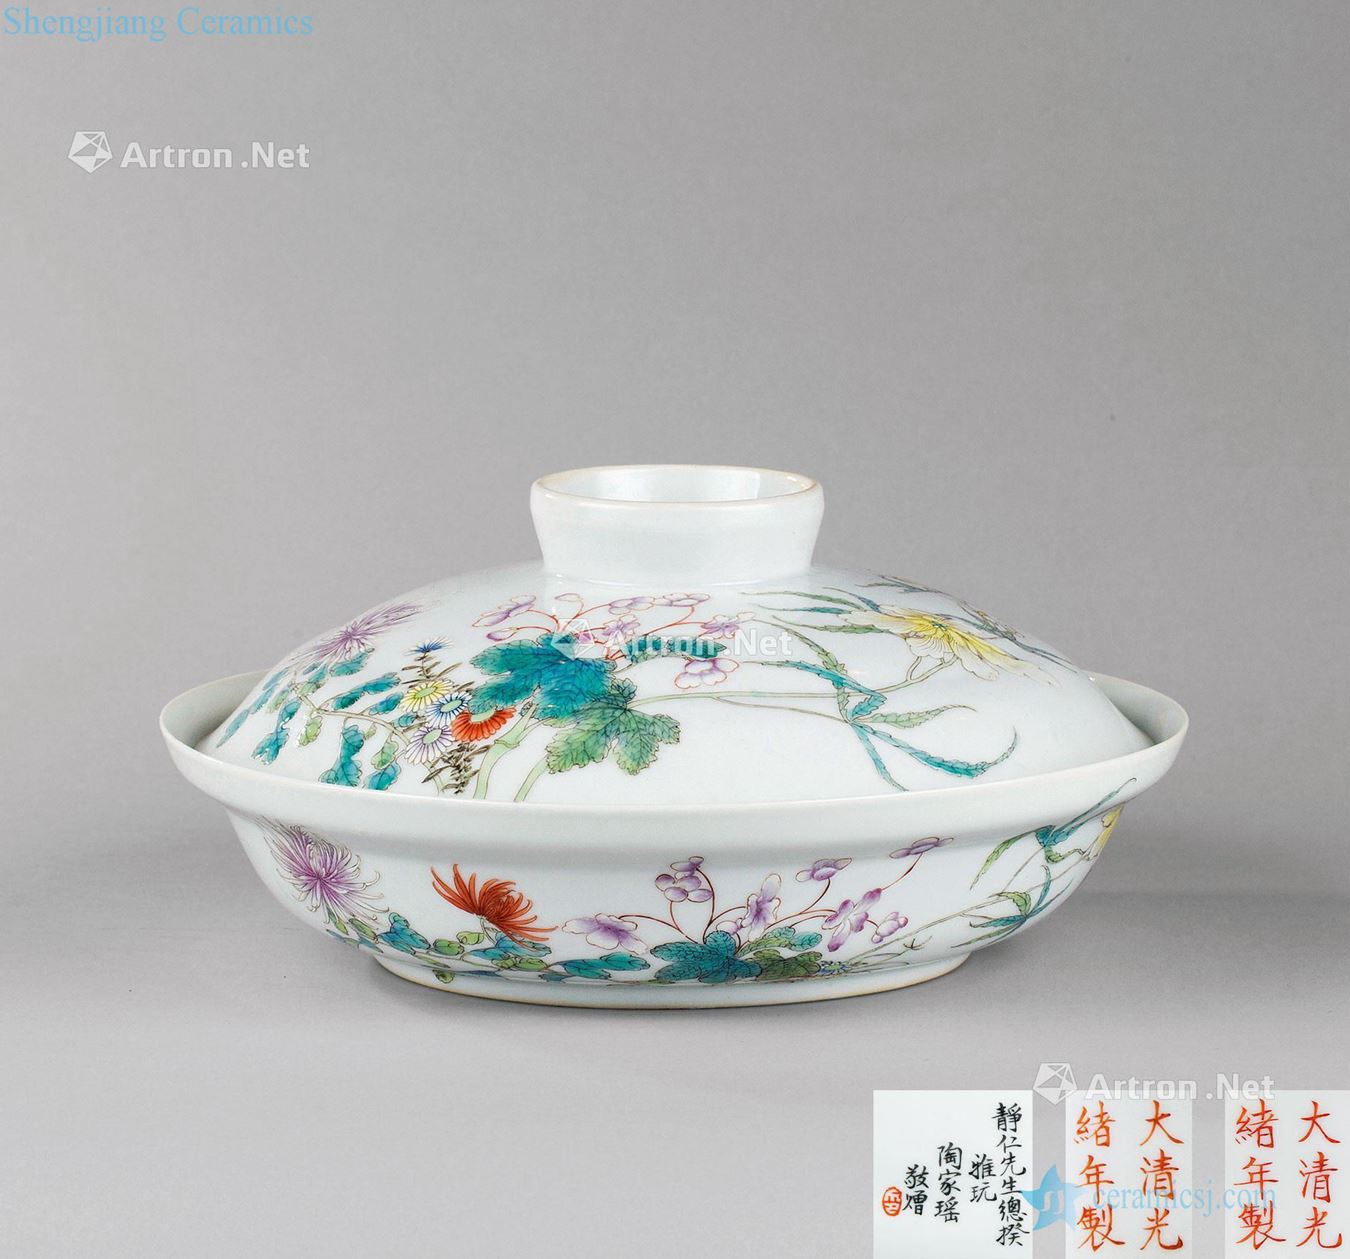 In the qing dynasty (1644-1911), pastel flowers lines cover basin